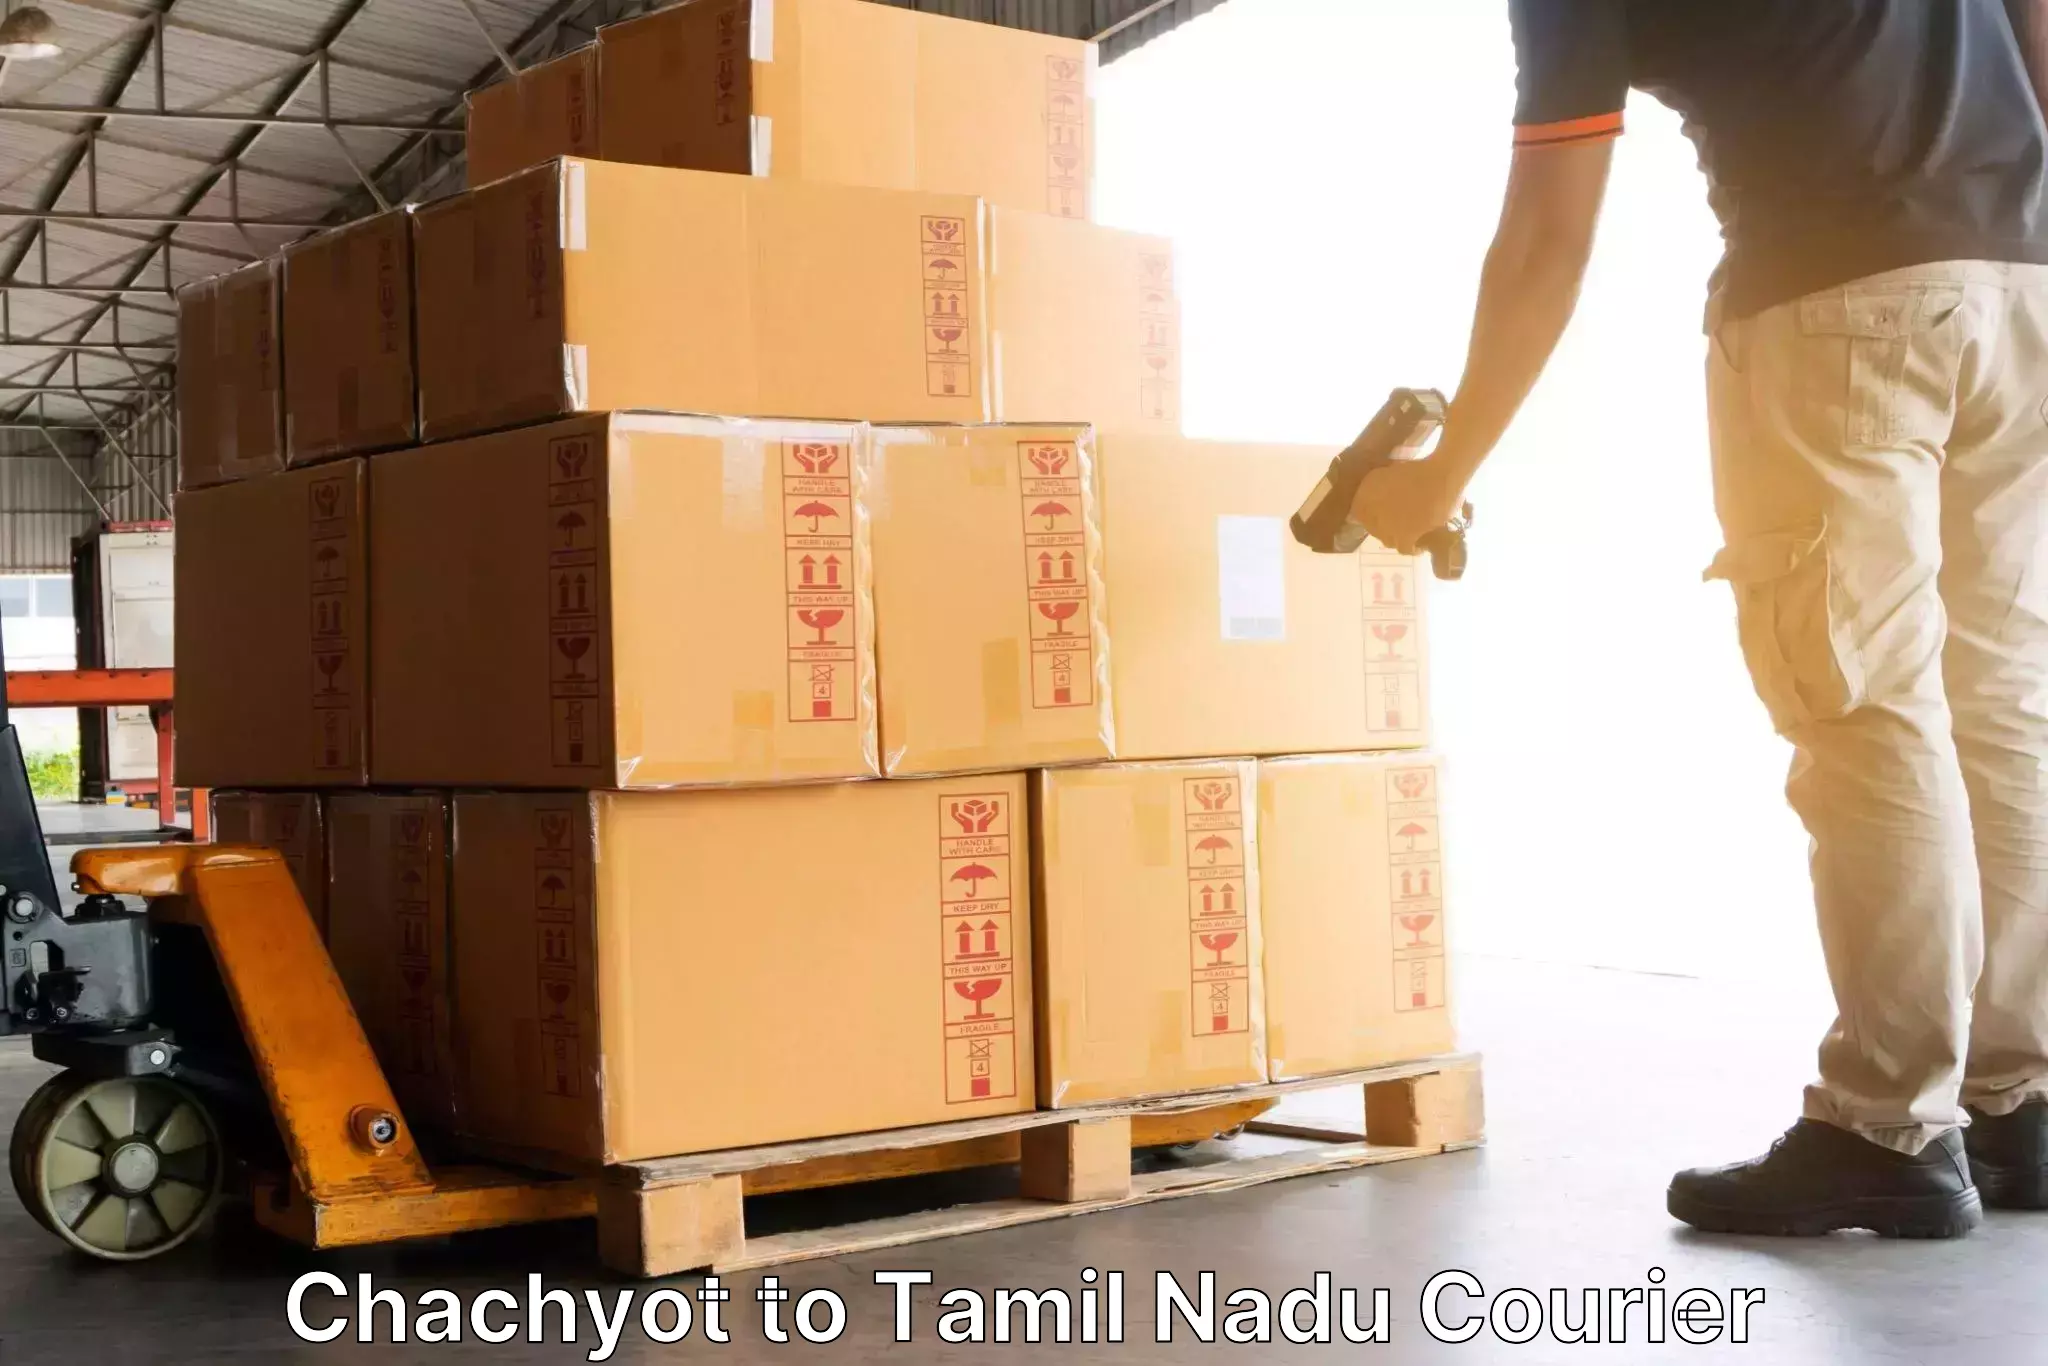 Efficient freight service Chachyot to Tirupur